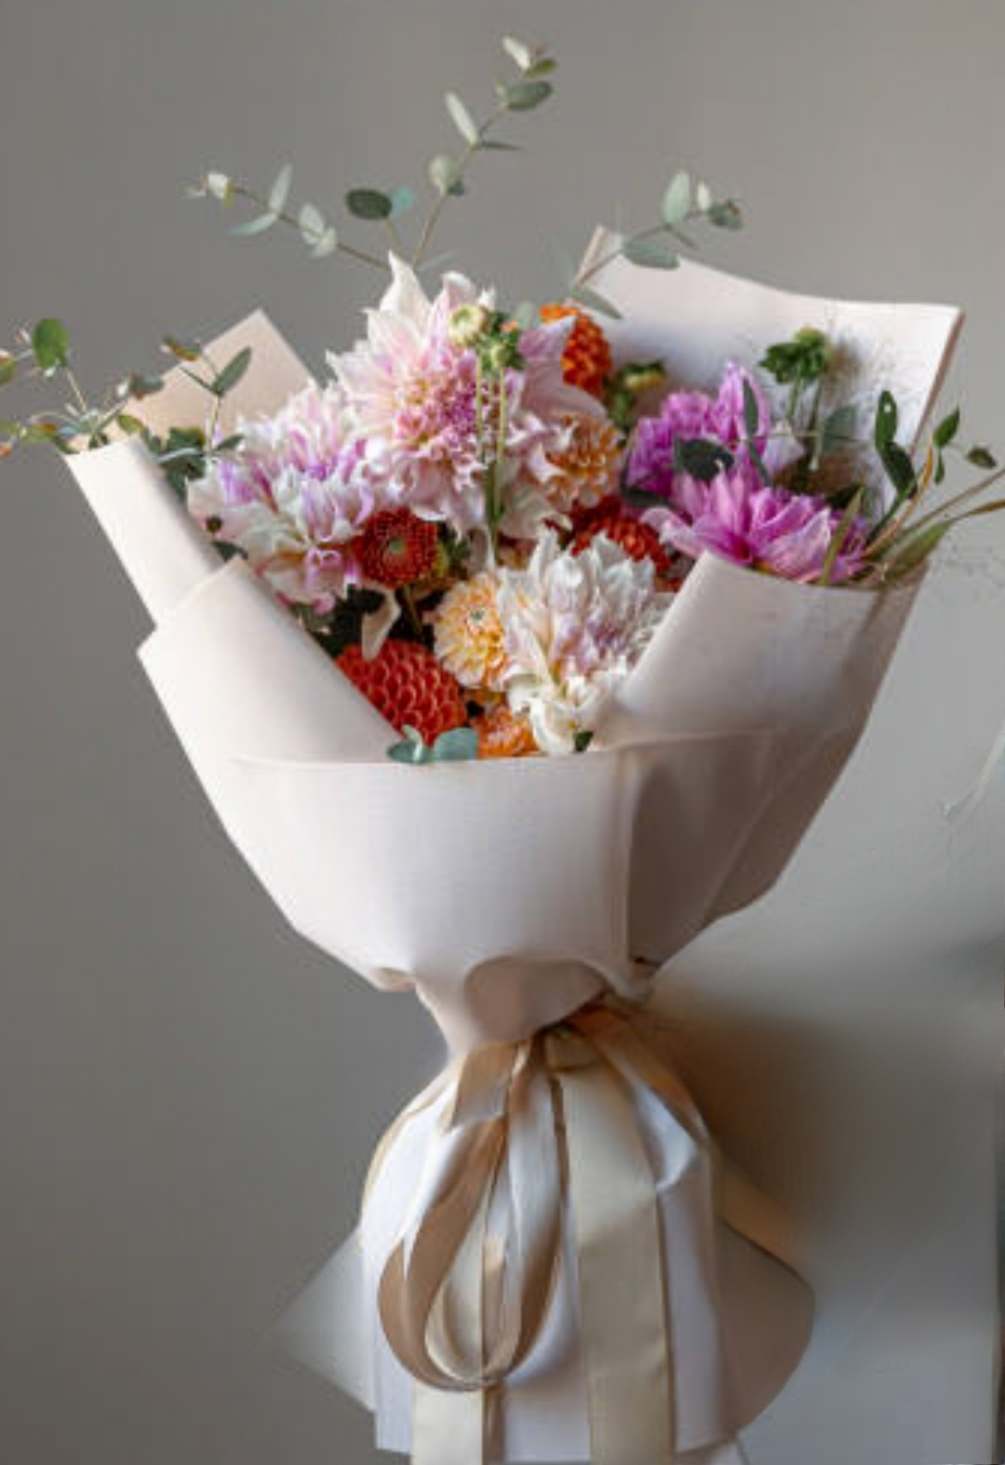 This bouquet says it in the name, if you need to say